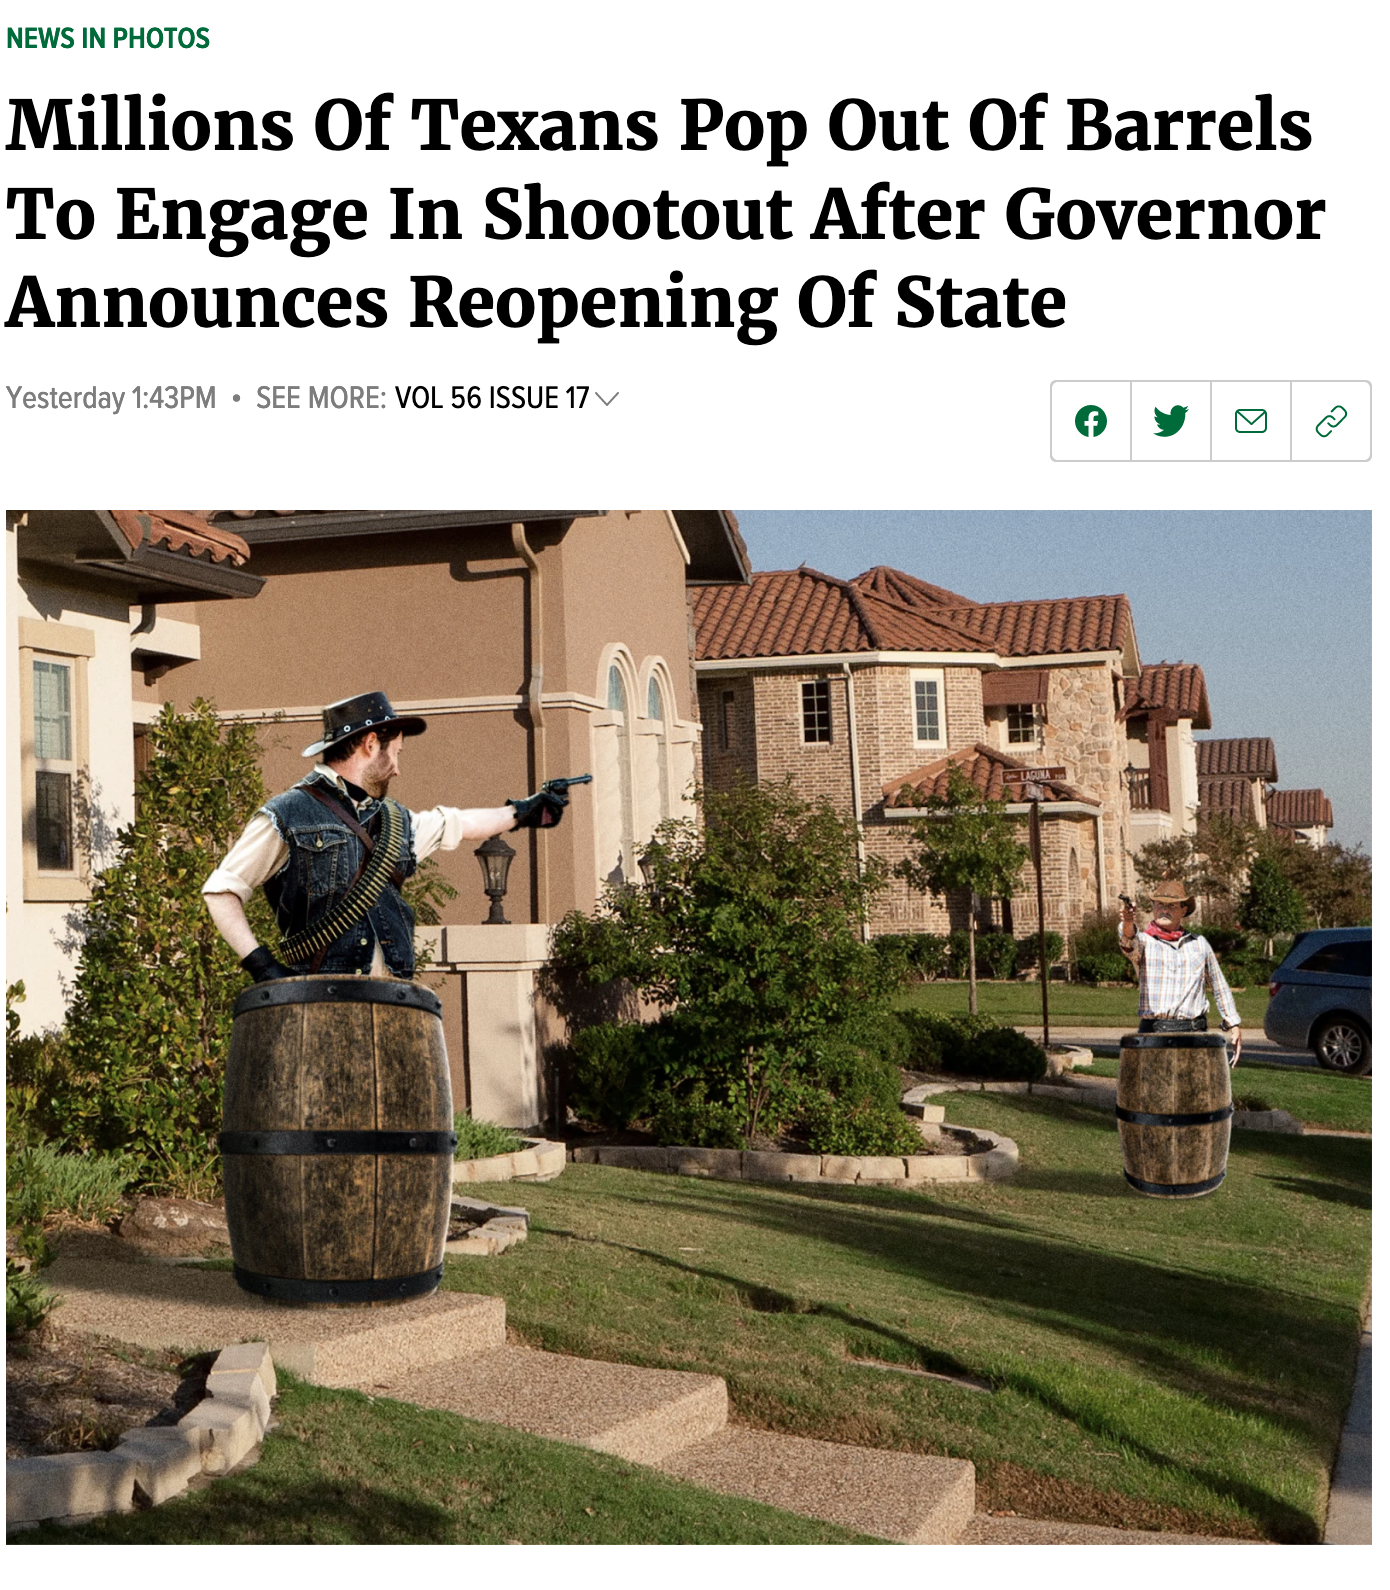 residential area - News In Photos Millions of Texans Pop Out Of Barrels To Engage In Shootout After Governor Announces Reopening of State Yesterday Pm. See More Vol 56 Issue 17